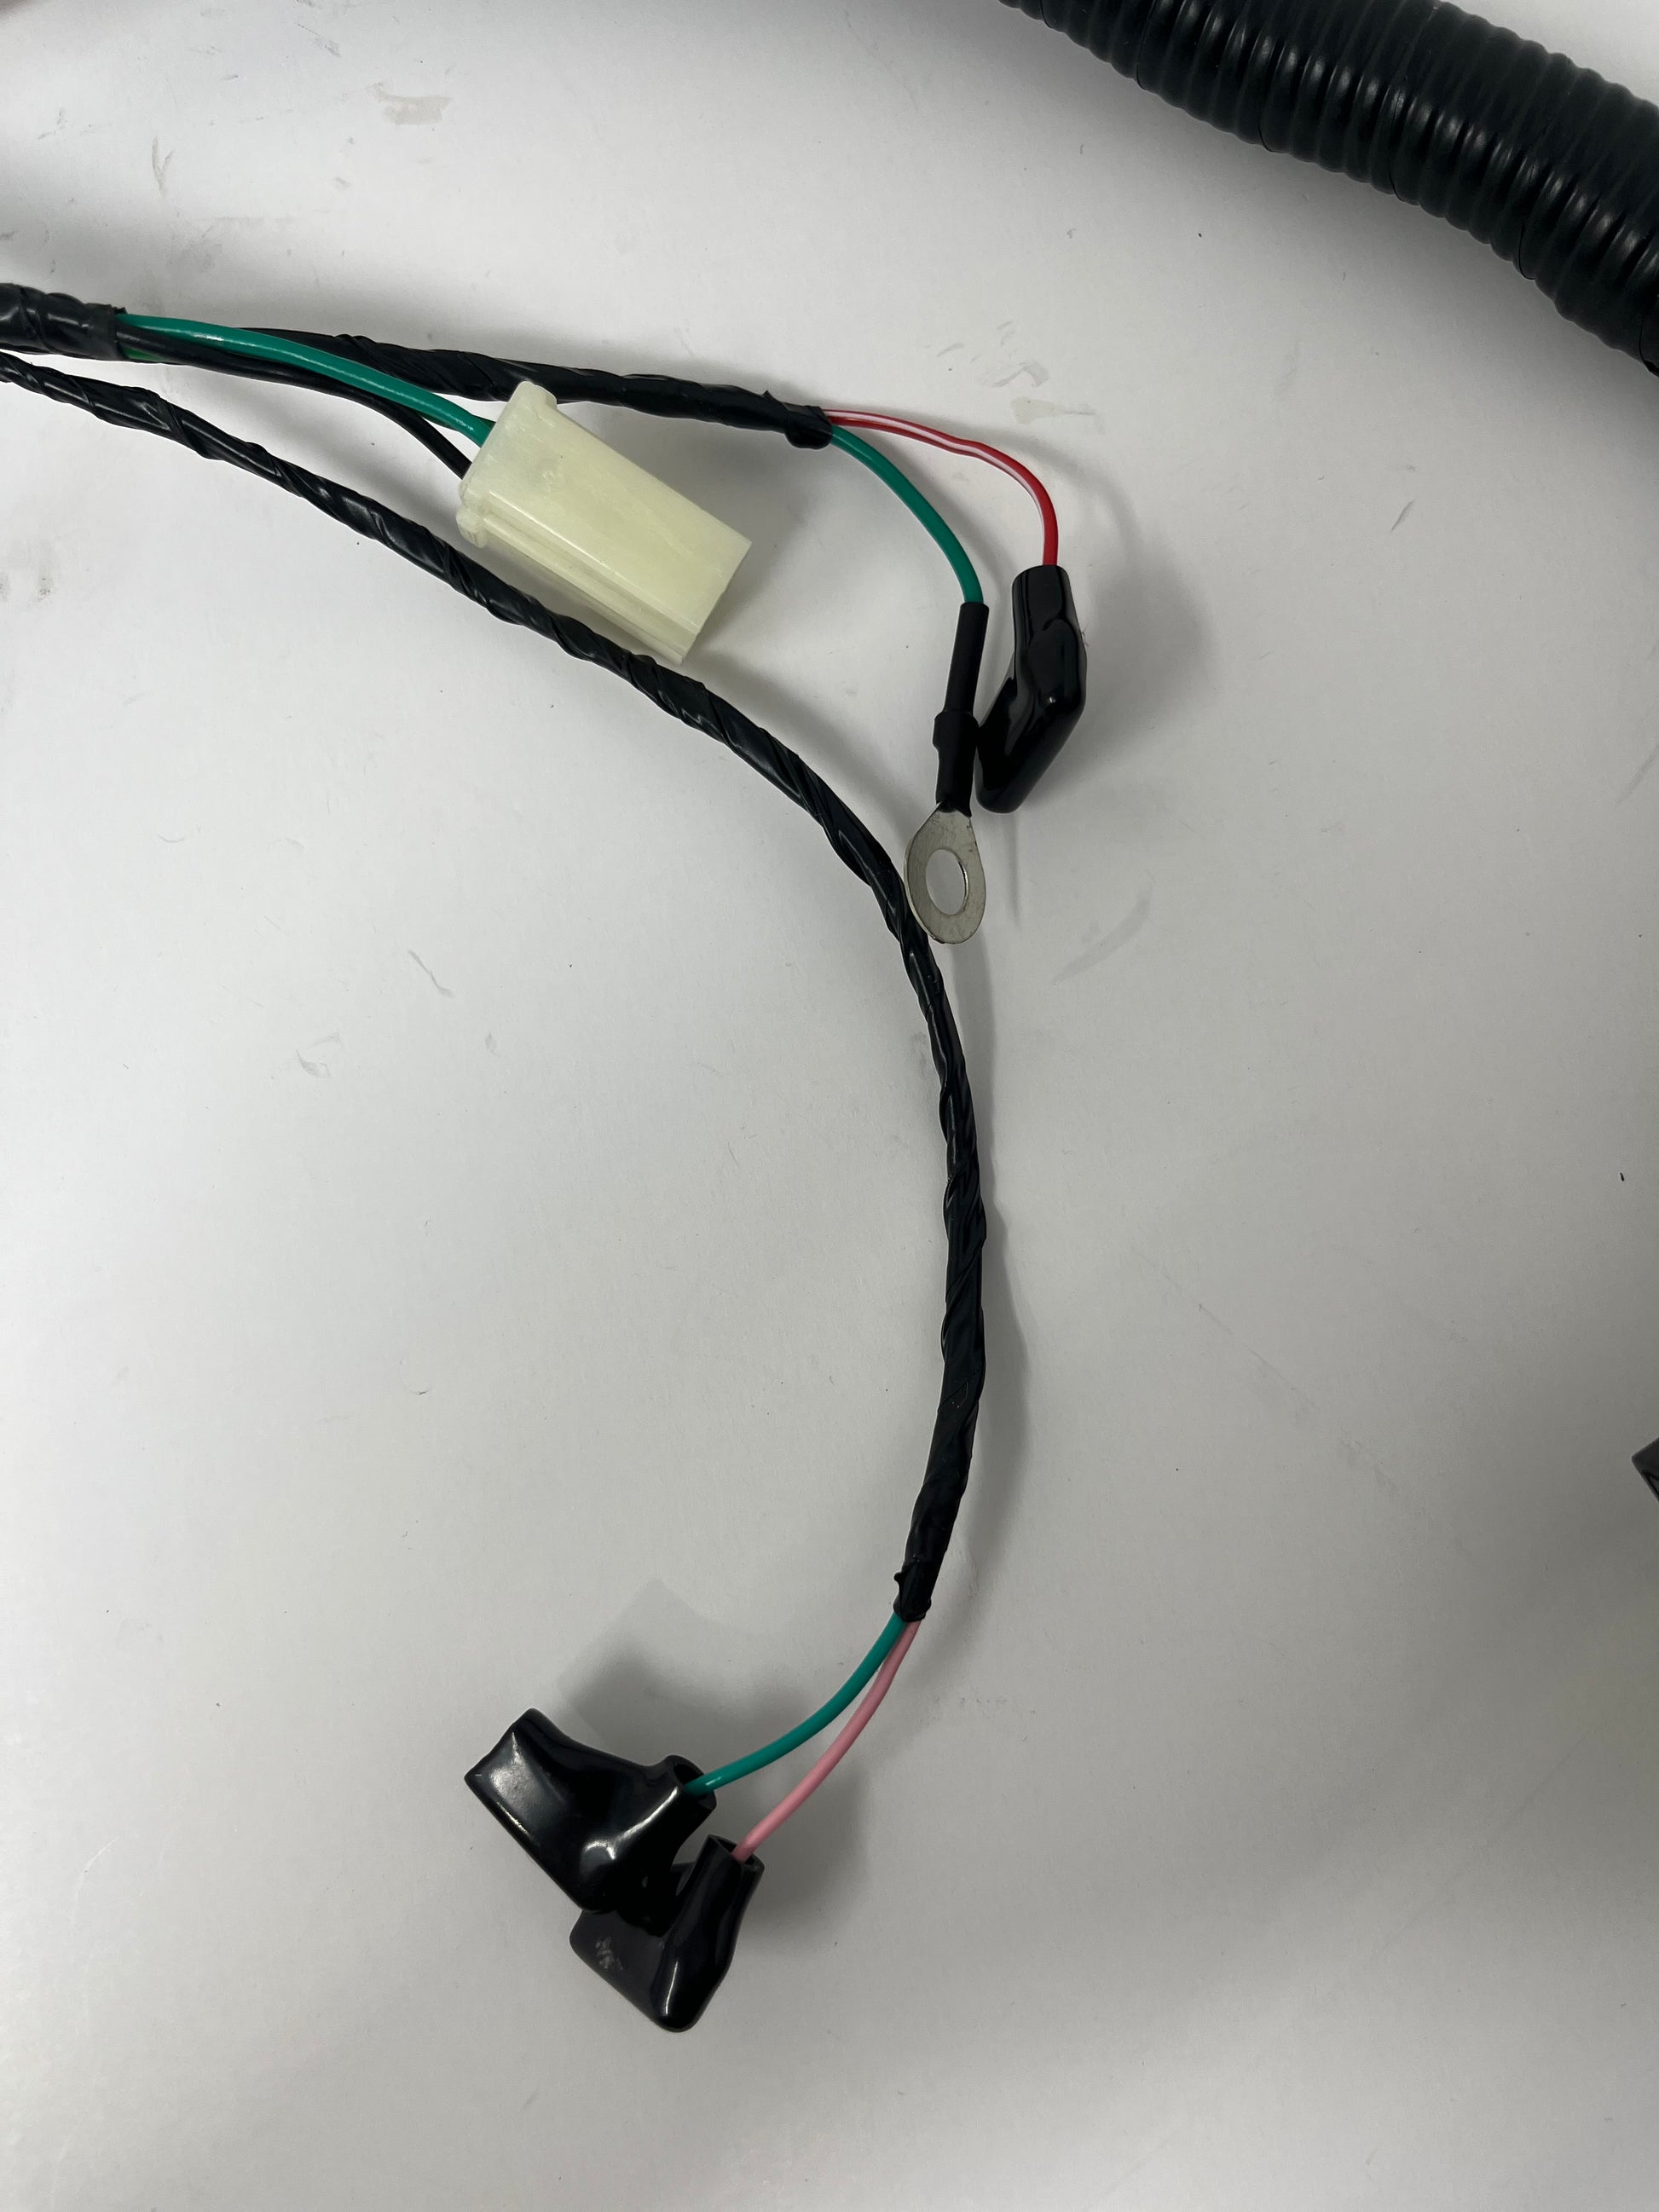 Electrical harness for DF250RTS. Buy Dongfang RTS electrical wiring harness parts.